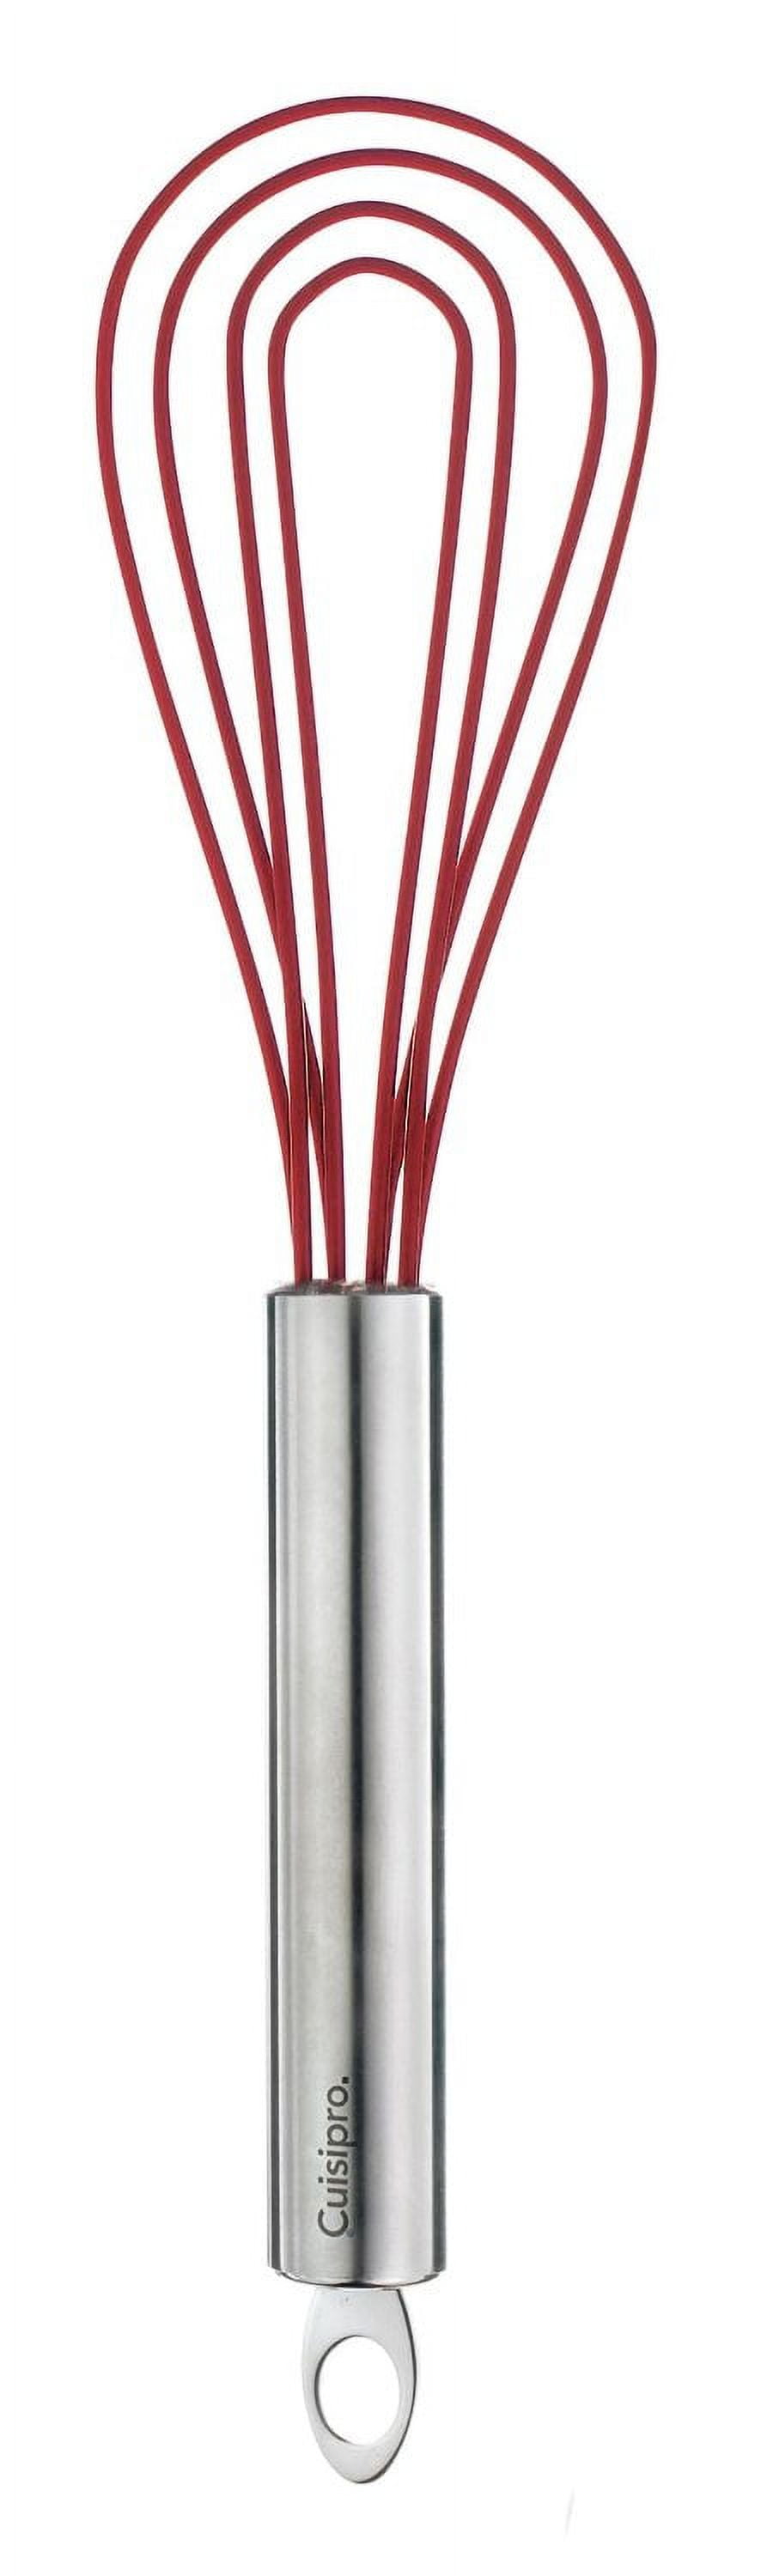 Cuisipro 8 Red Silicone Coated Flat Whisk